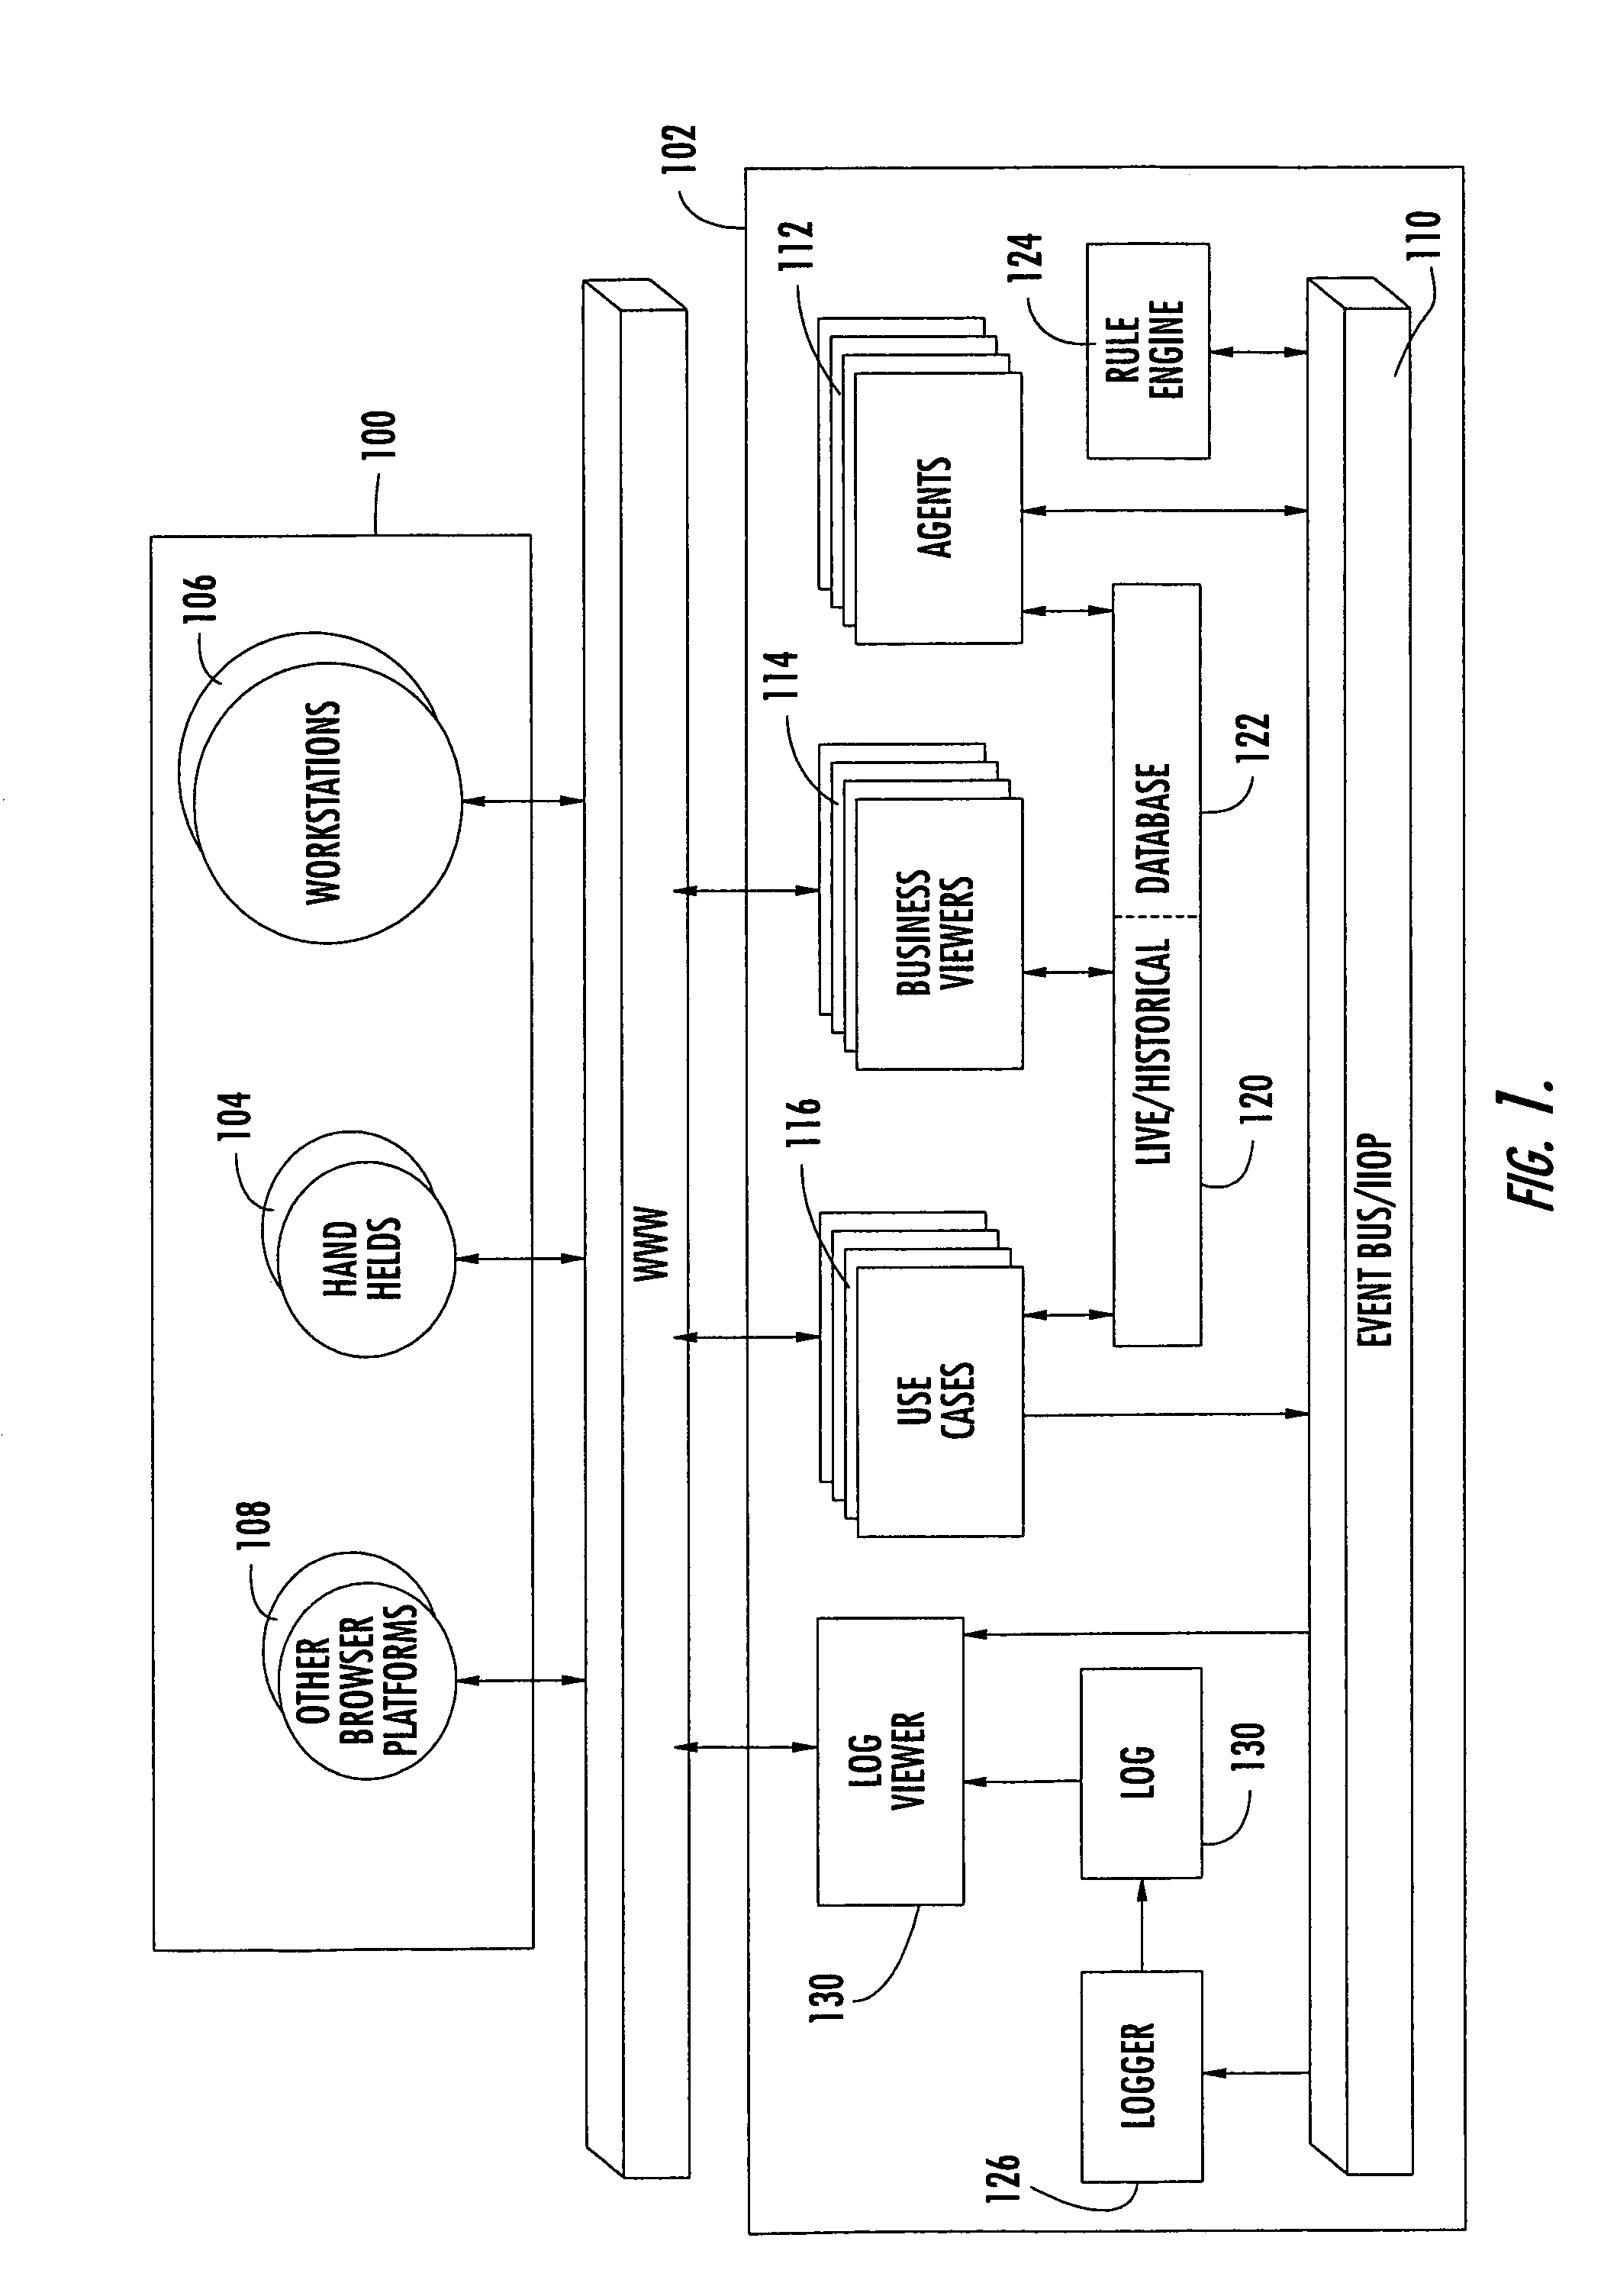 System and method for managing mobile workers